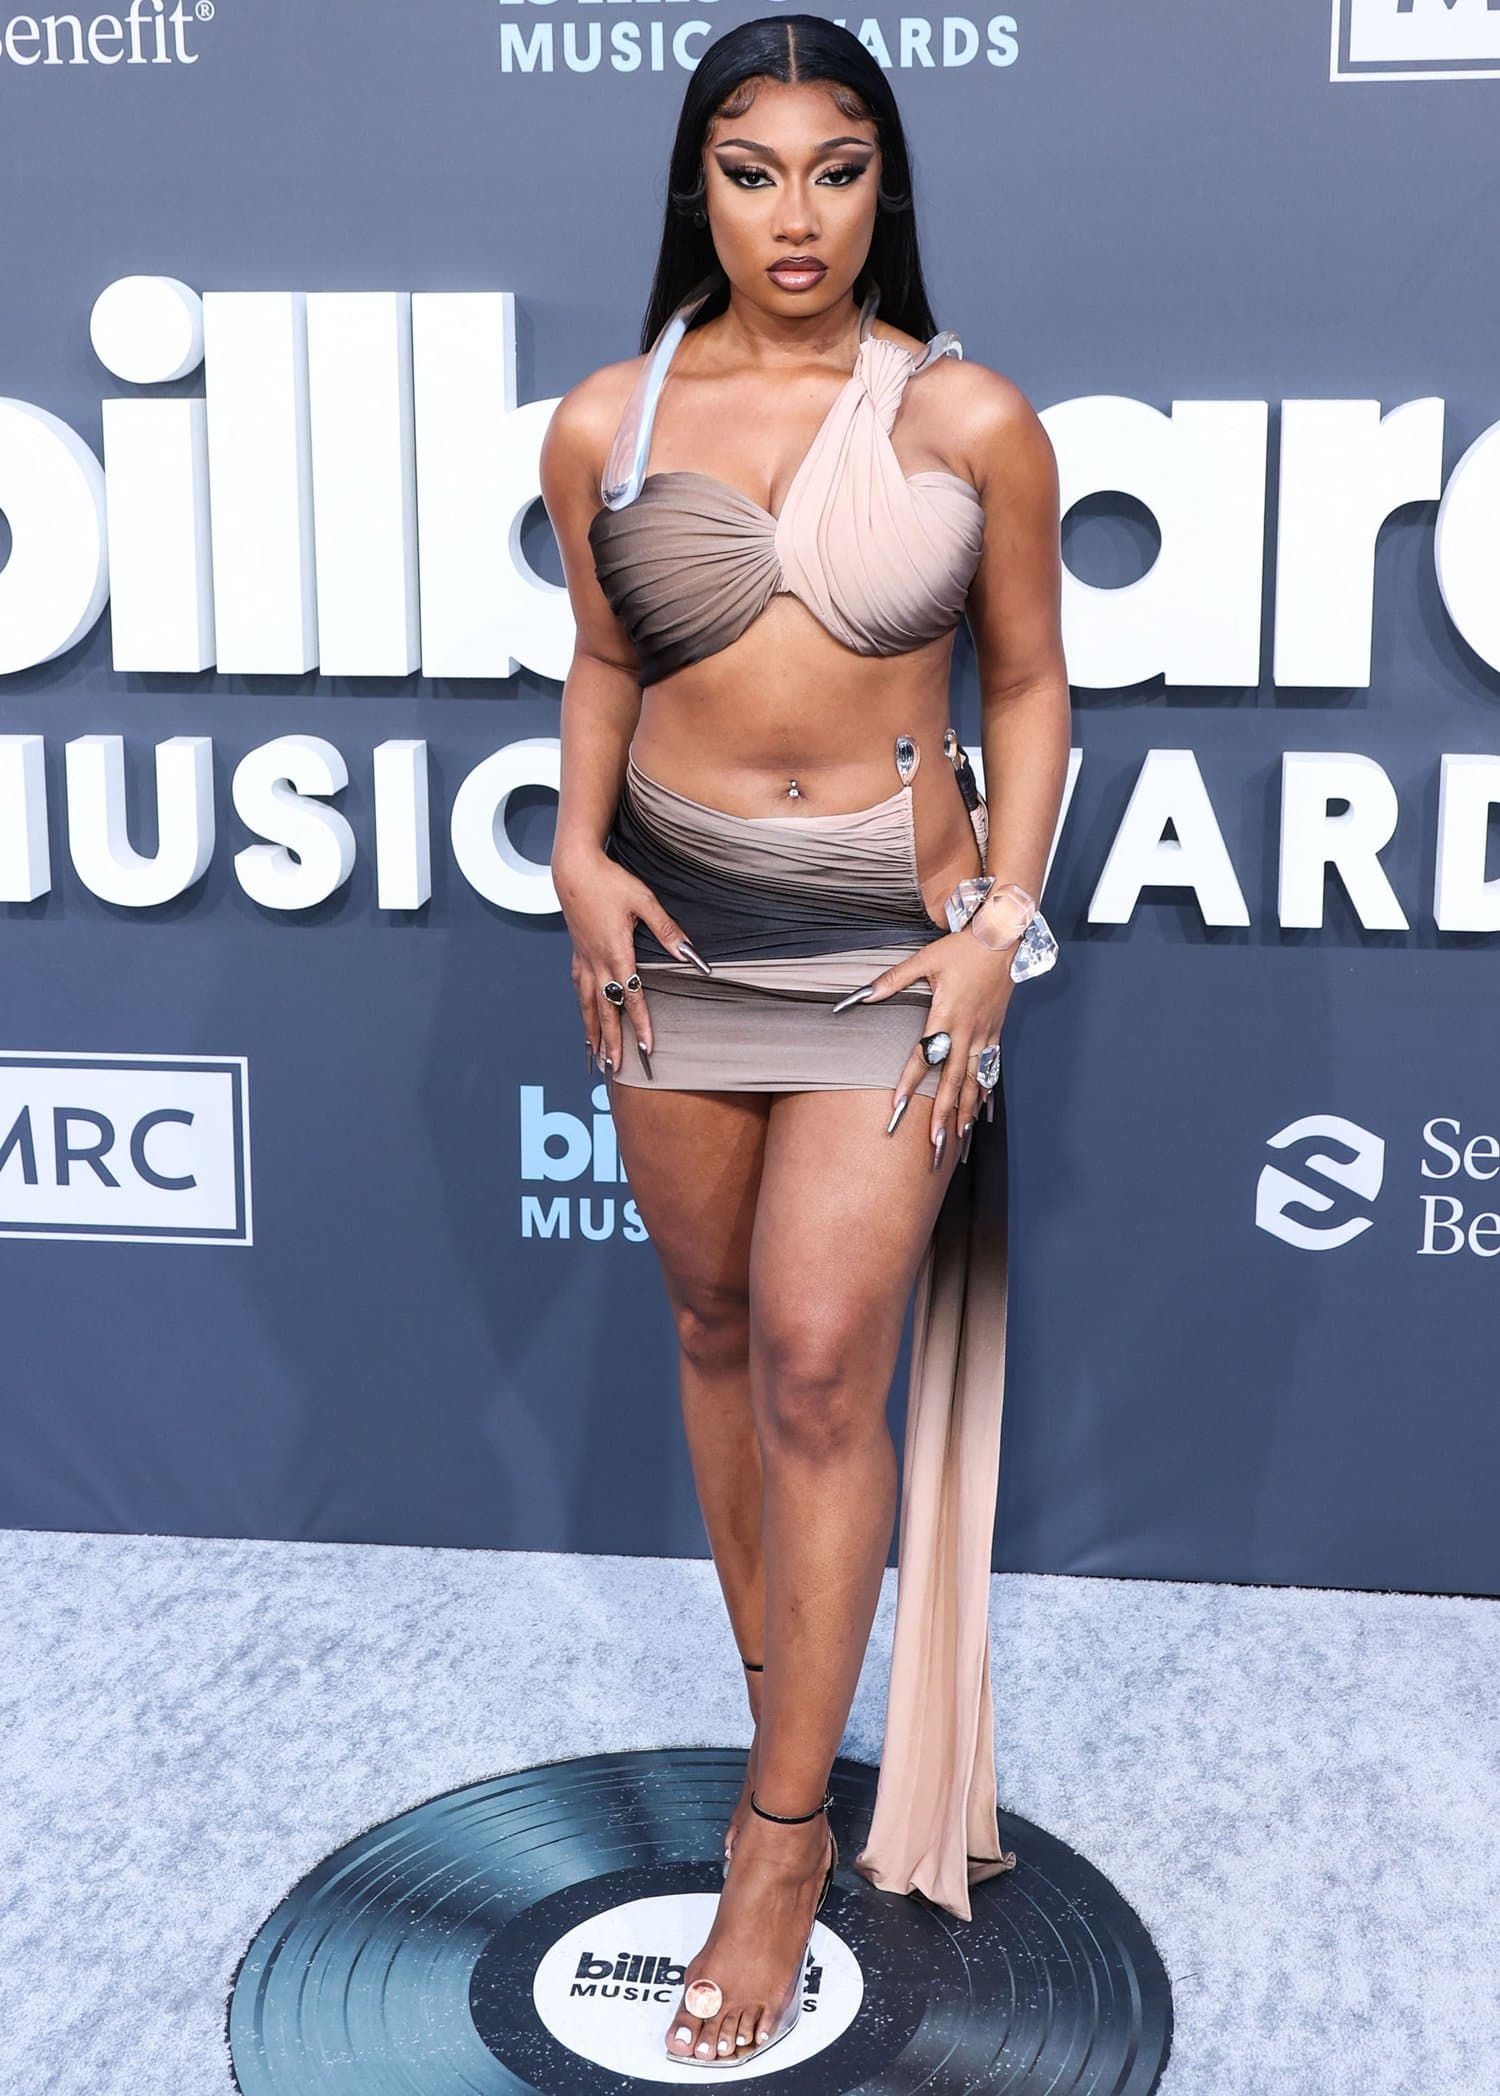 Megan Thee Stallion flaunts her legs in a cutout bandage dress at the 2022 Billboard Music Awards